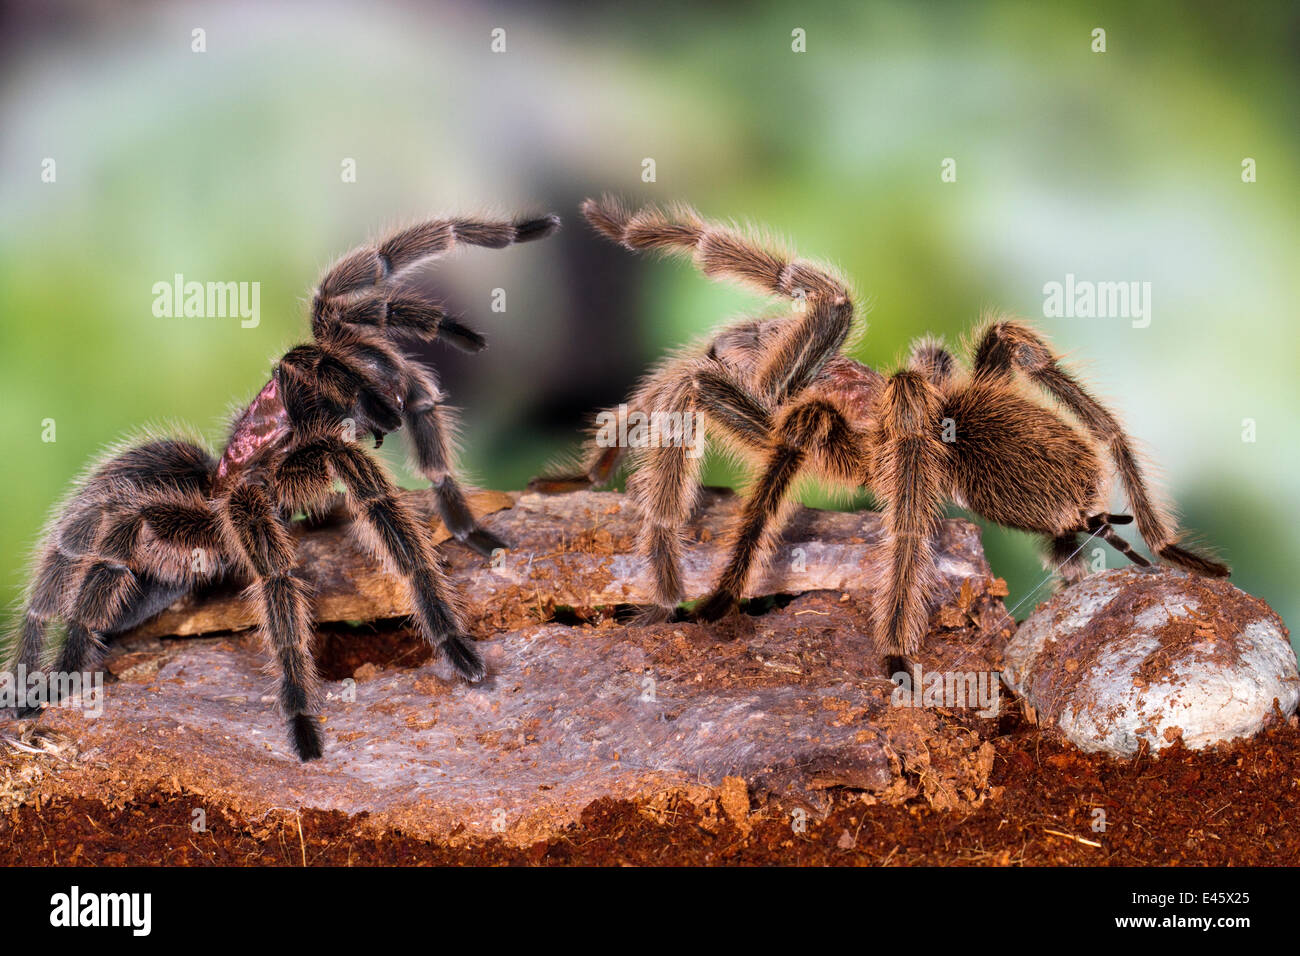 Chilean rose / flame / fire / red-haired tarantula (Grammostola rosea) pair mating, female on left, male on right, from South America Stock Photo